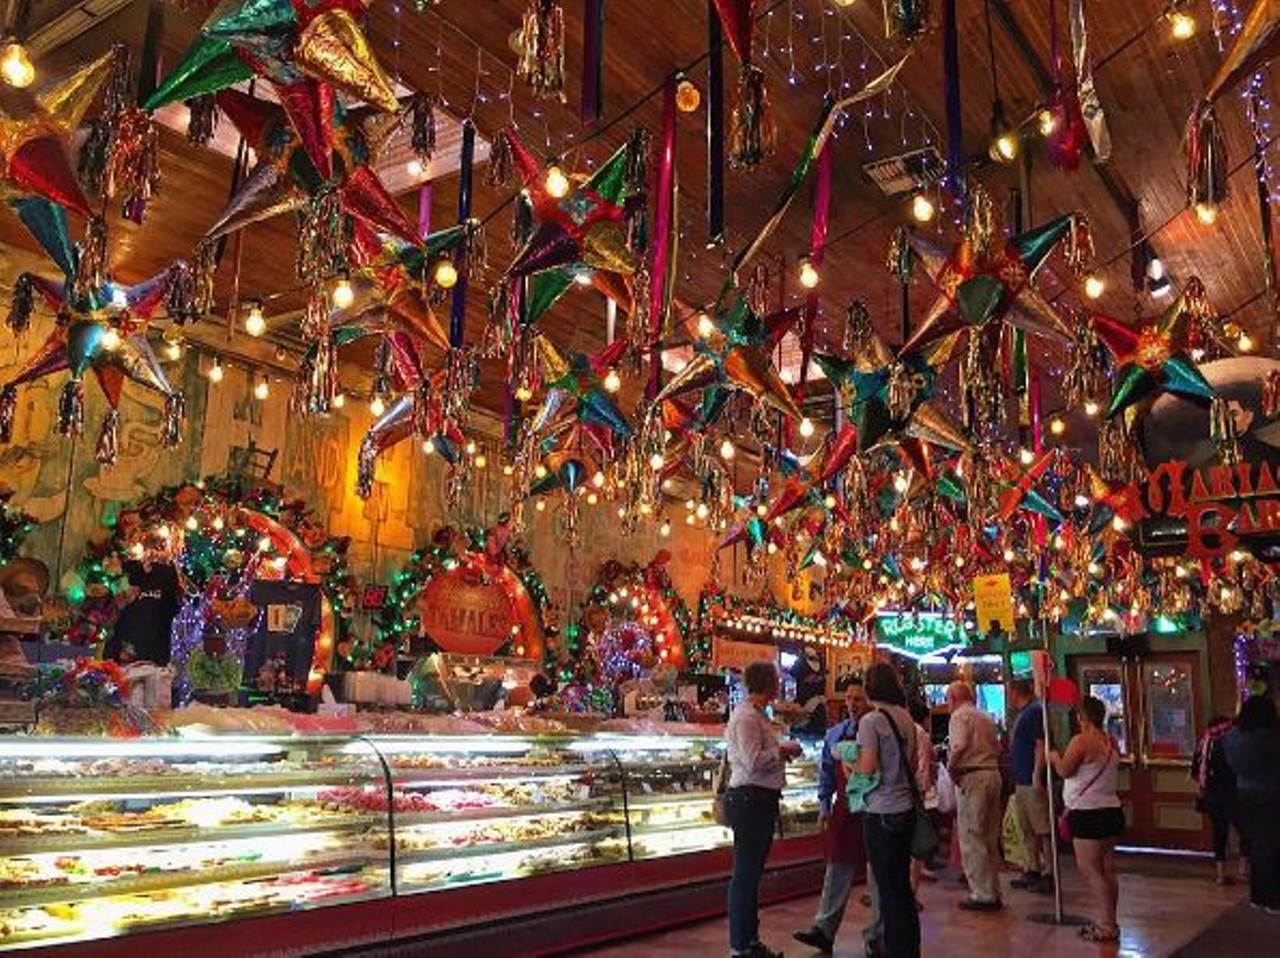 Mi Tierra
218 Produce Row, (210) 225-1262, mitierracafe.com
Have some breakfast tacos or chow down on some fajitas, and don&#146;t forget to take a bag of pan dulce for the next morning. You can&#146;t go wrong hitting up this 24 hour haven.
Photo via Instagram, lezzzl3y_